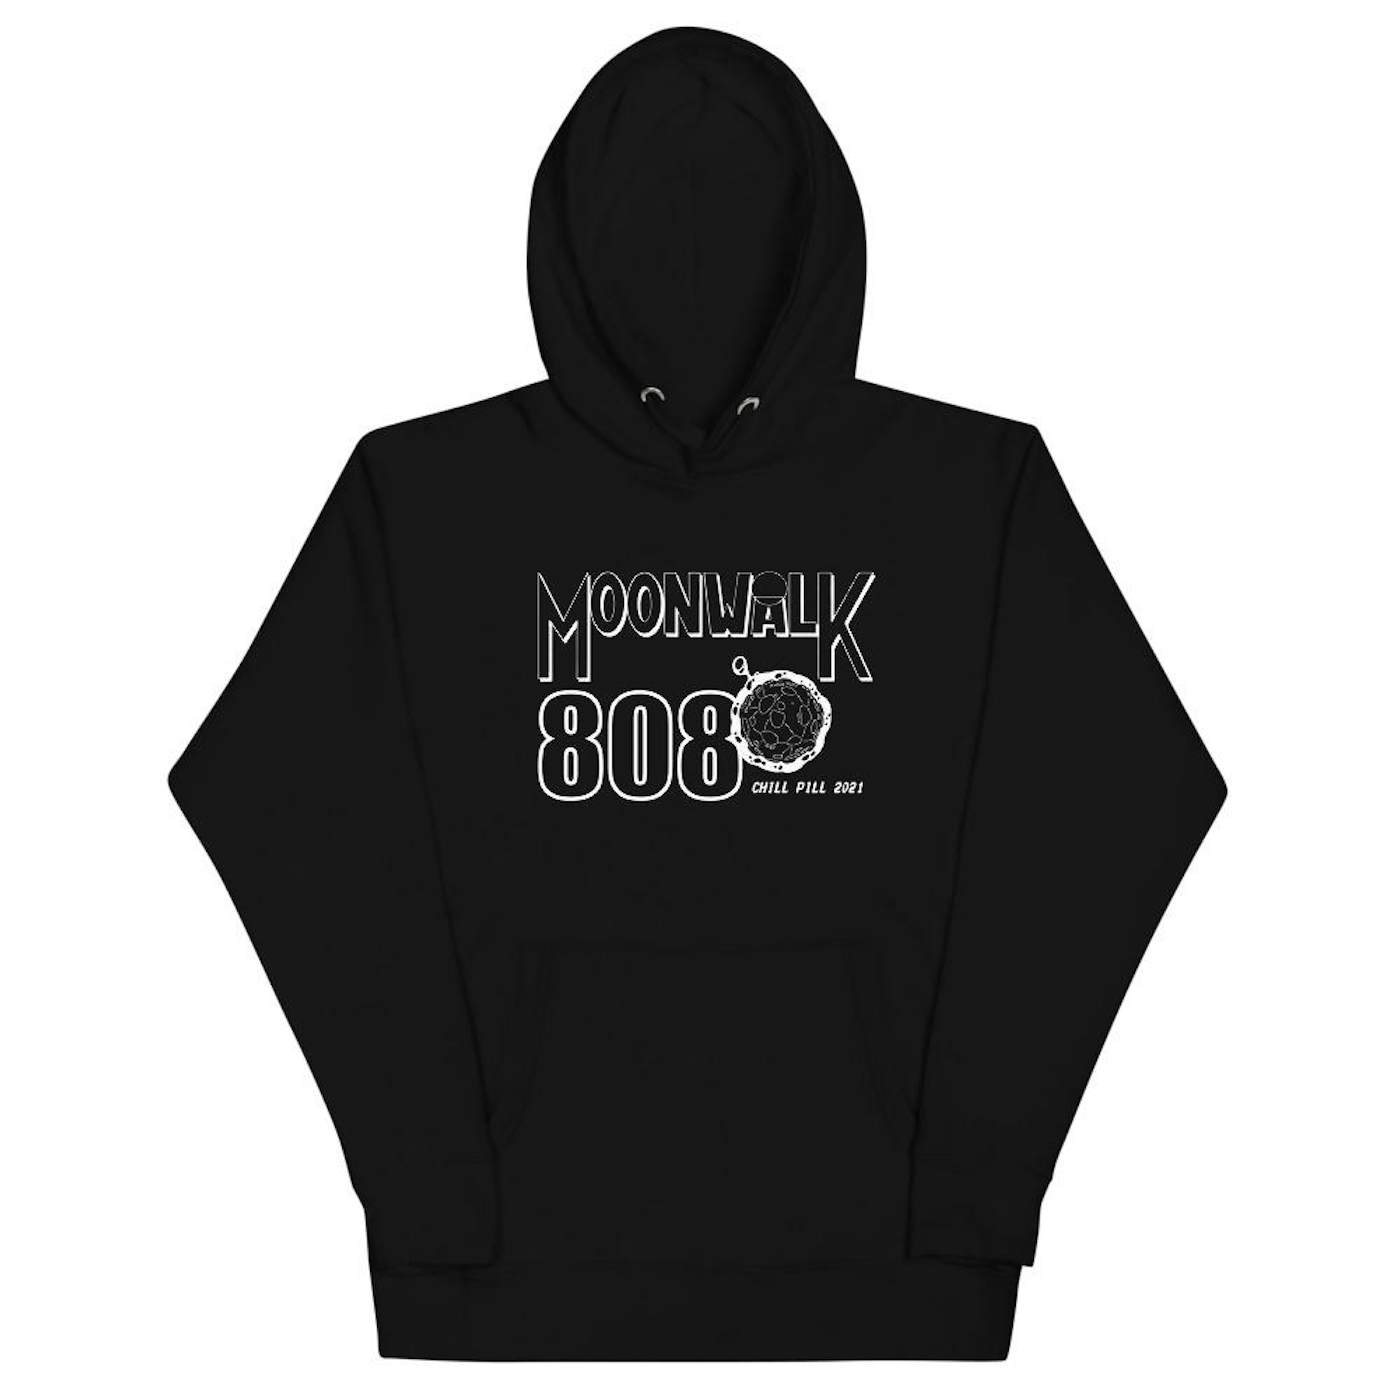 chillpill 808 on the MOON Hoodie